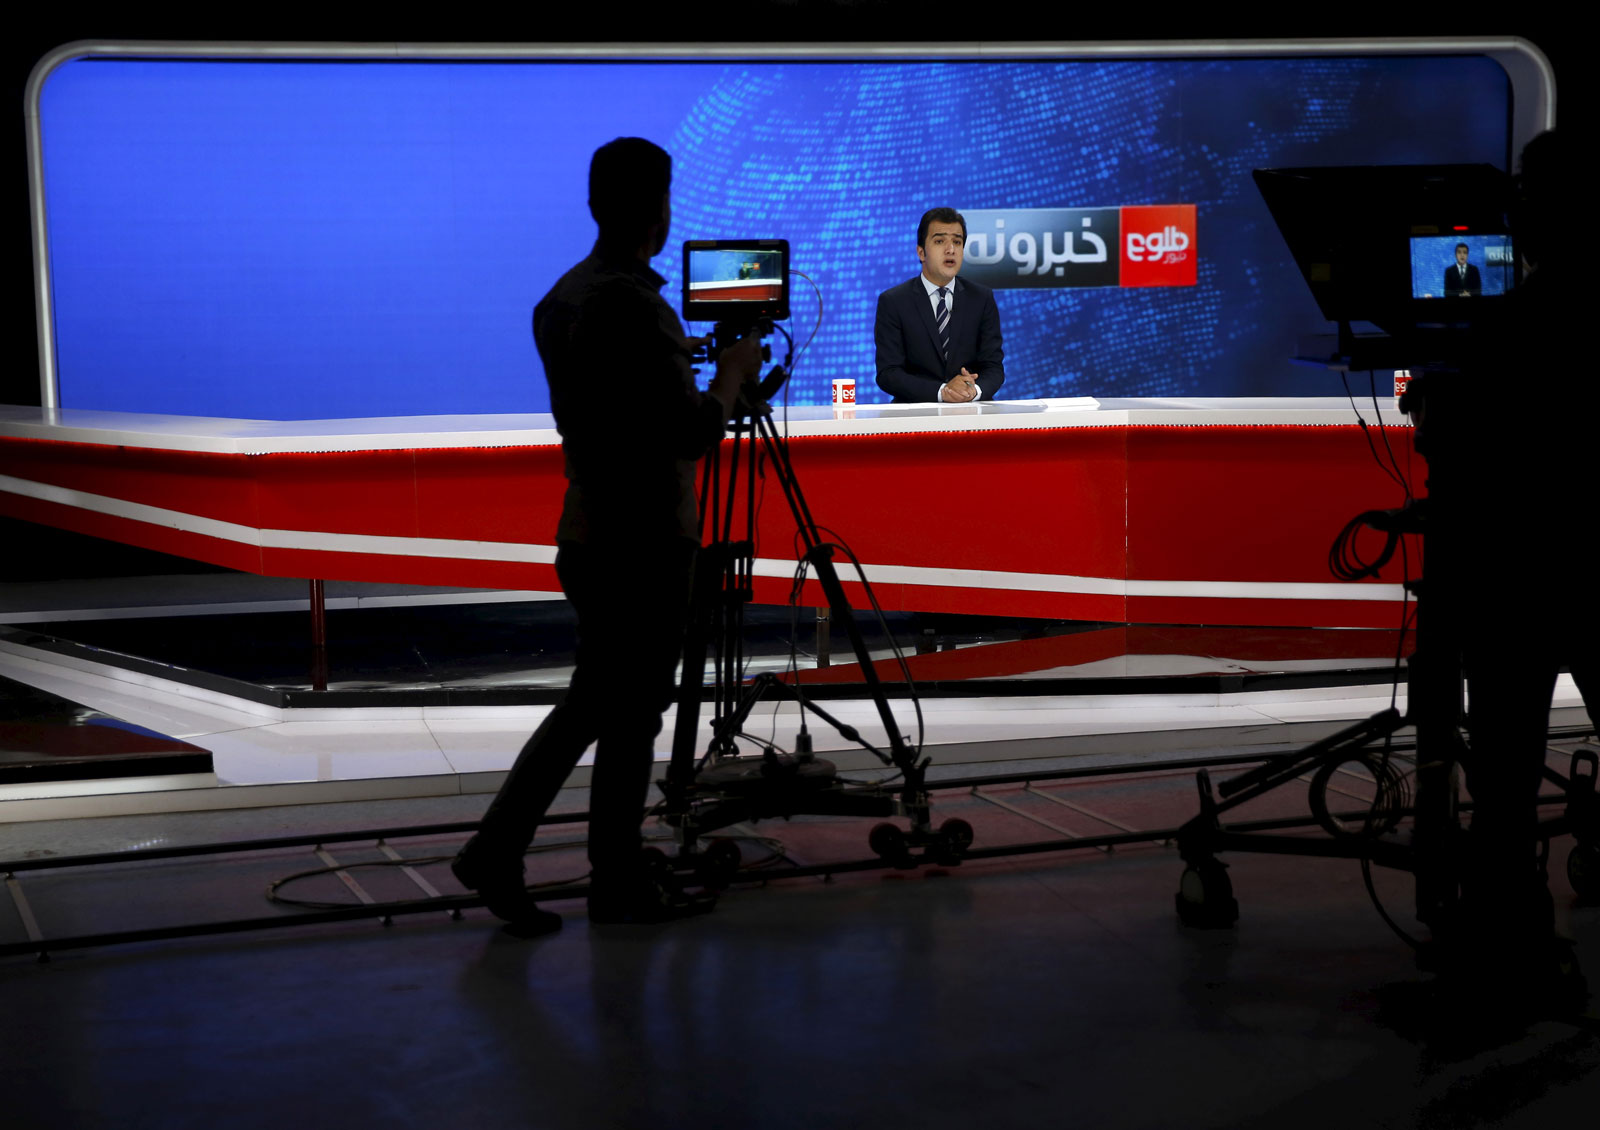 The Tolo TV news studio, in Kabul, Afghanistan, October 18, 2015